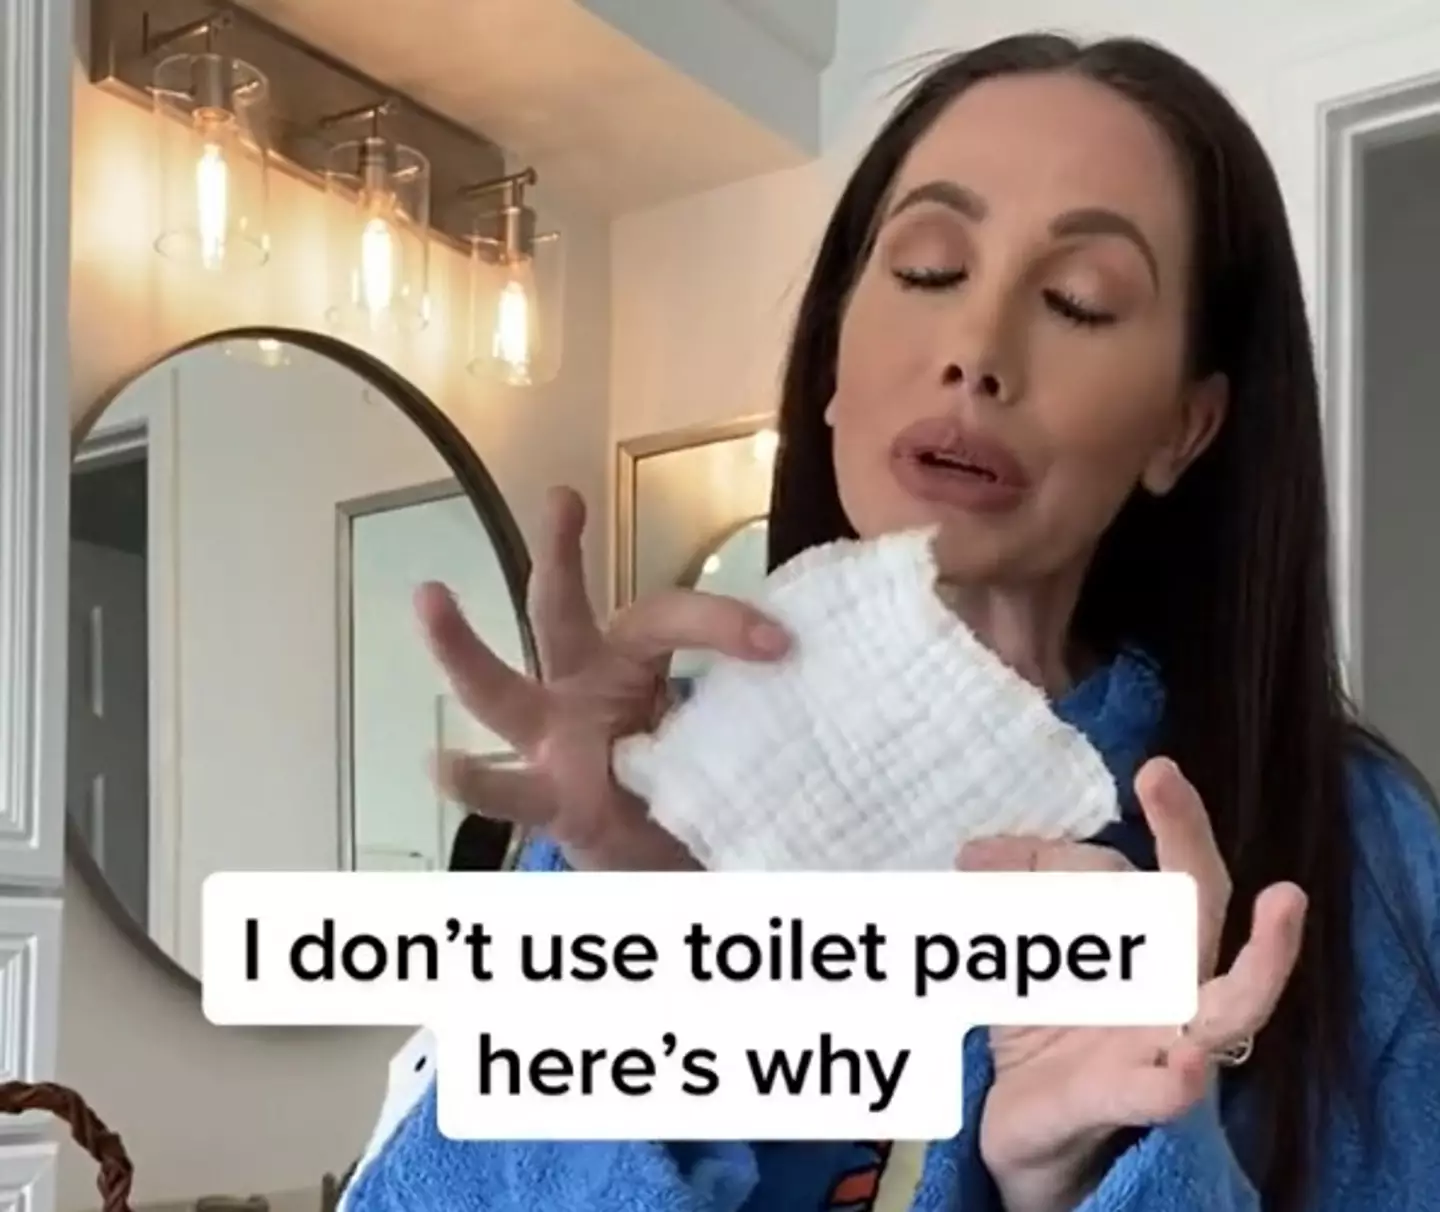 Who needs toilet paper when you have a reusable cloth?